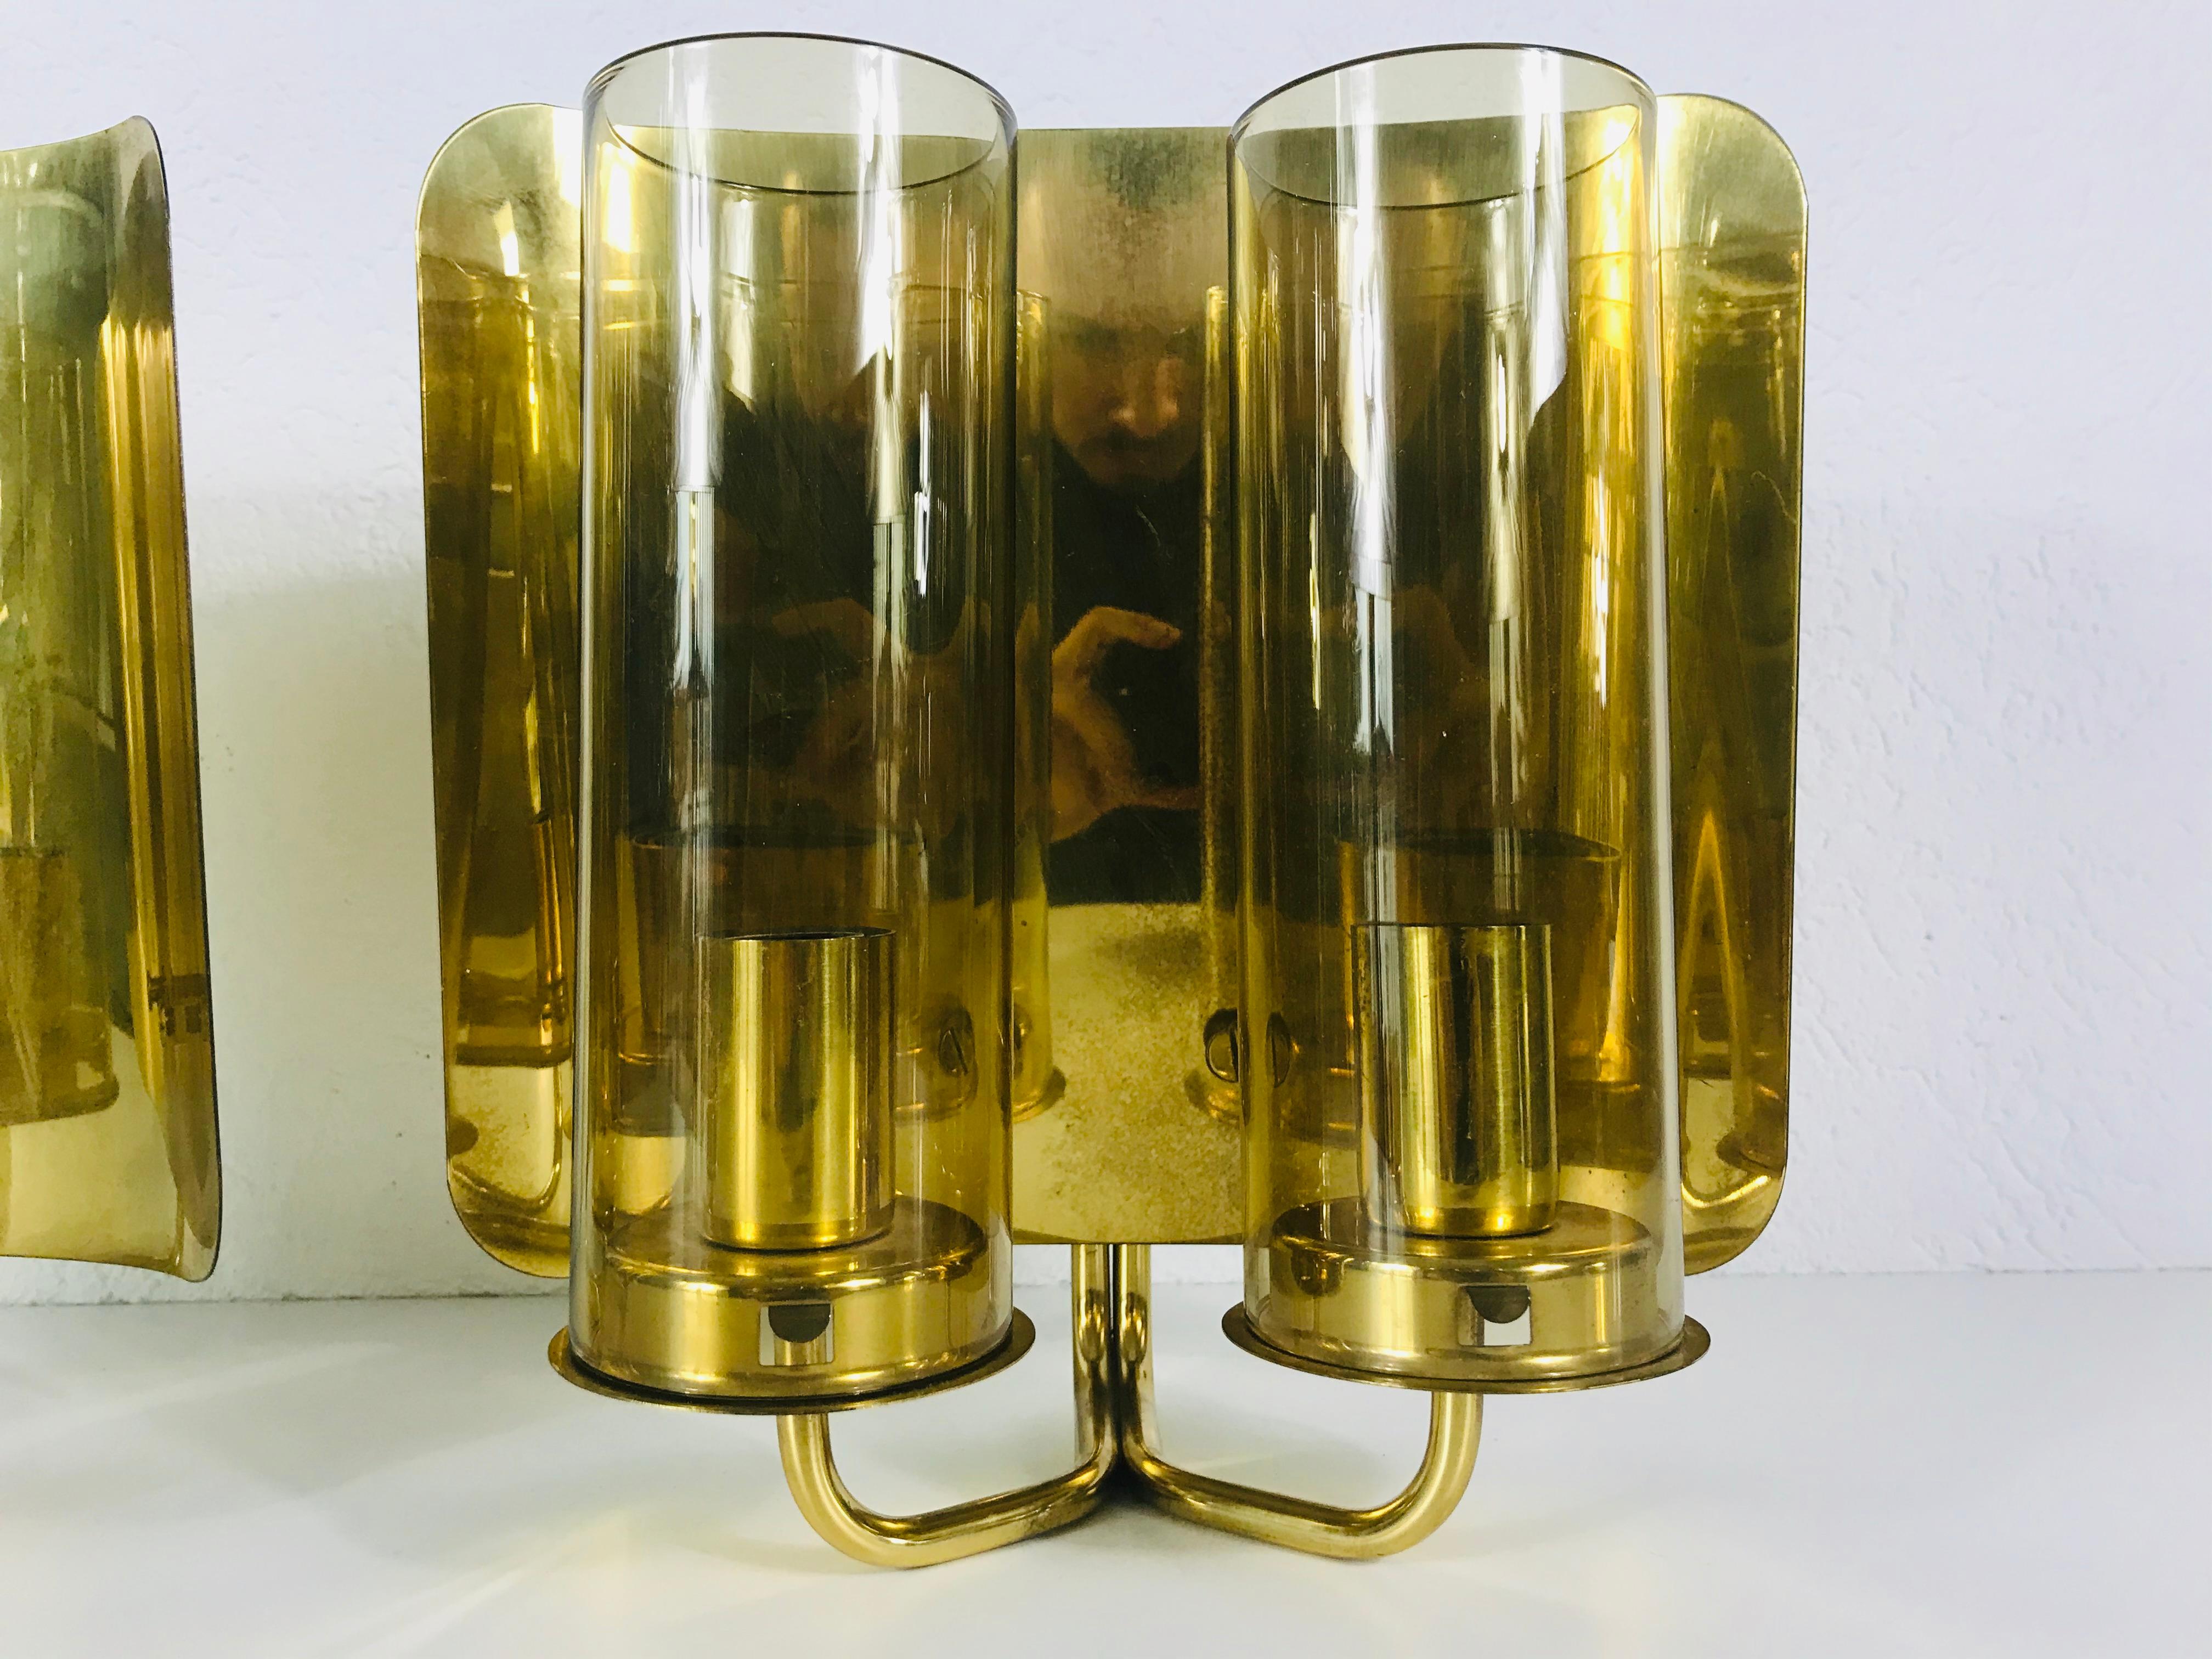 Pair of Mid-Century Modern Brass Sconces by Hans-Agne Jakobsson, Sweden, 1960s For Sale 5